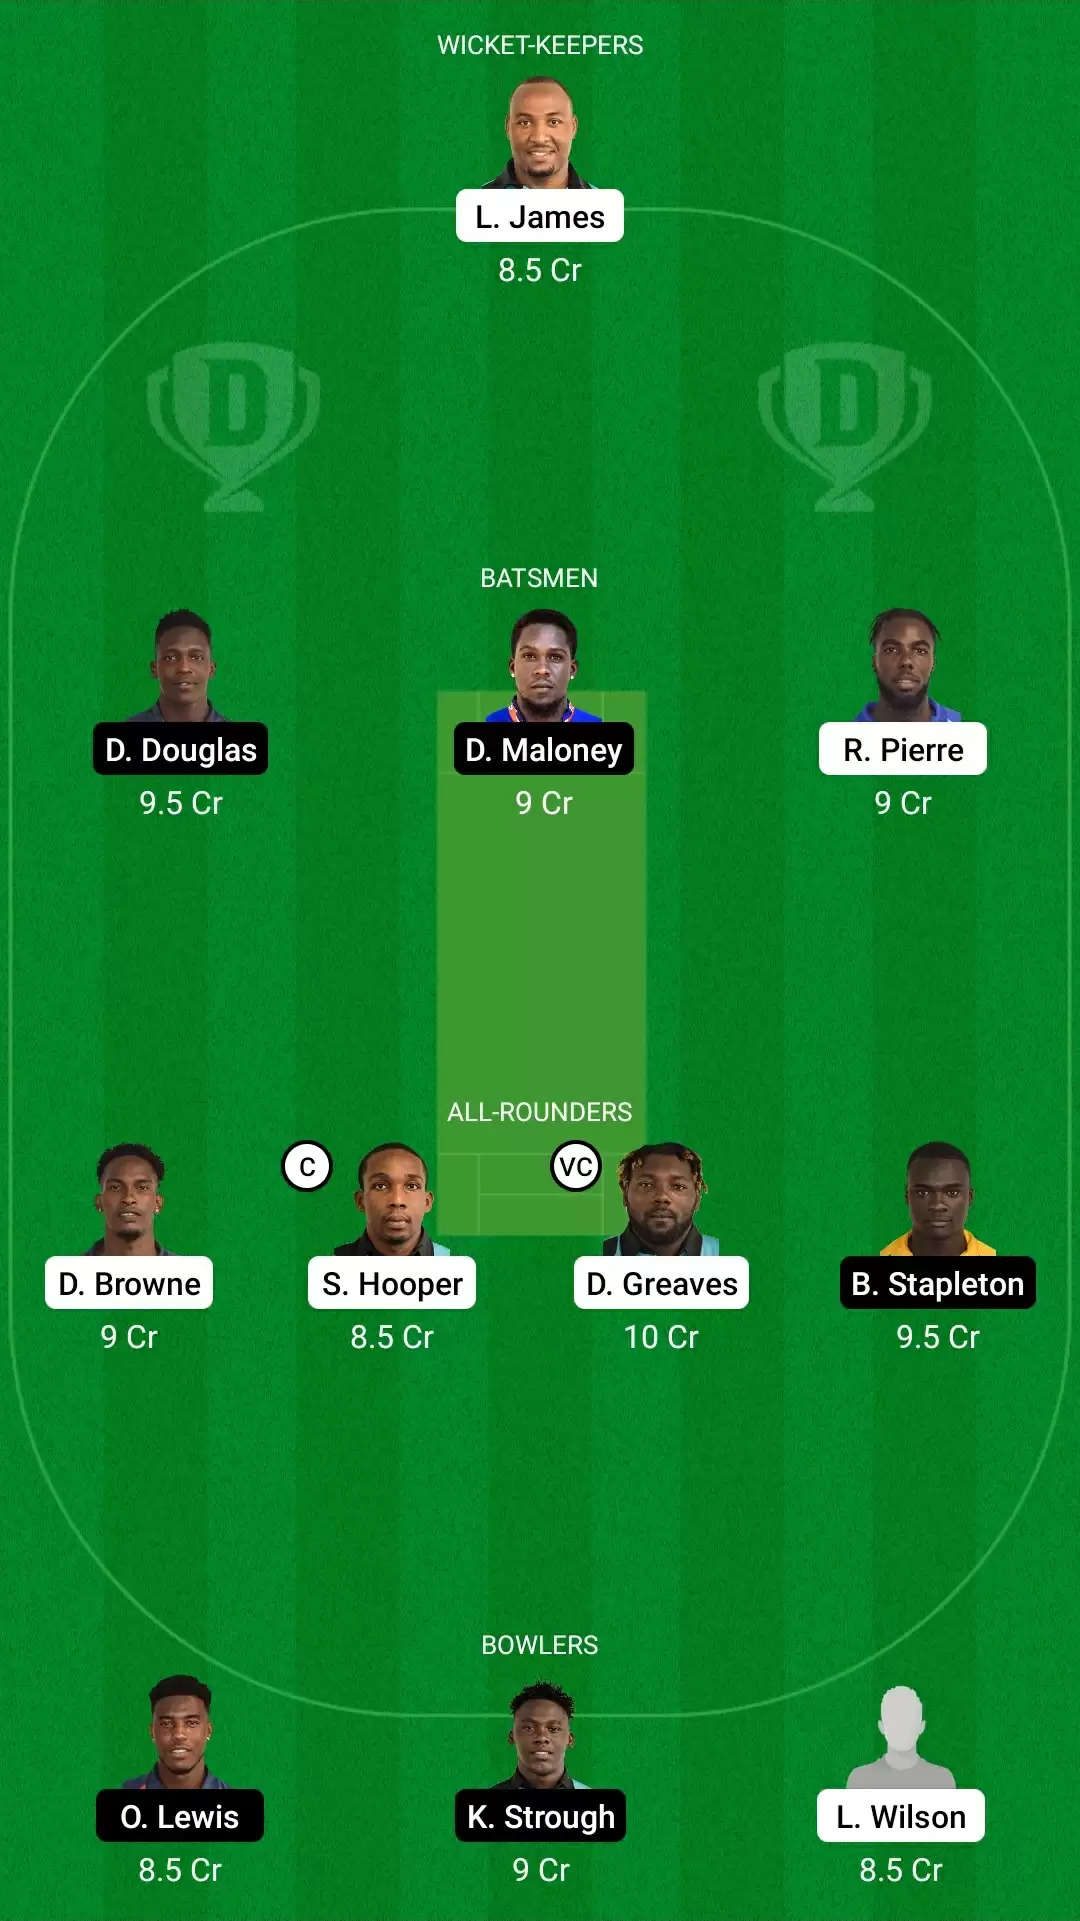 Vincy Premier League 2021, Match 17: DVE vs LSH Dream11 Prediction, Fantasy Cricket Tips, Team, Playing 11, Pitch Report, Weather Conditions and Injury Update